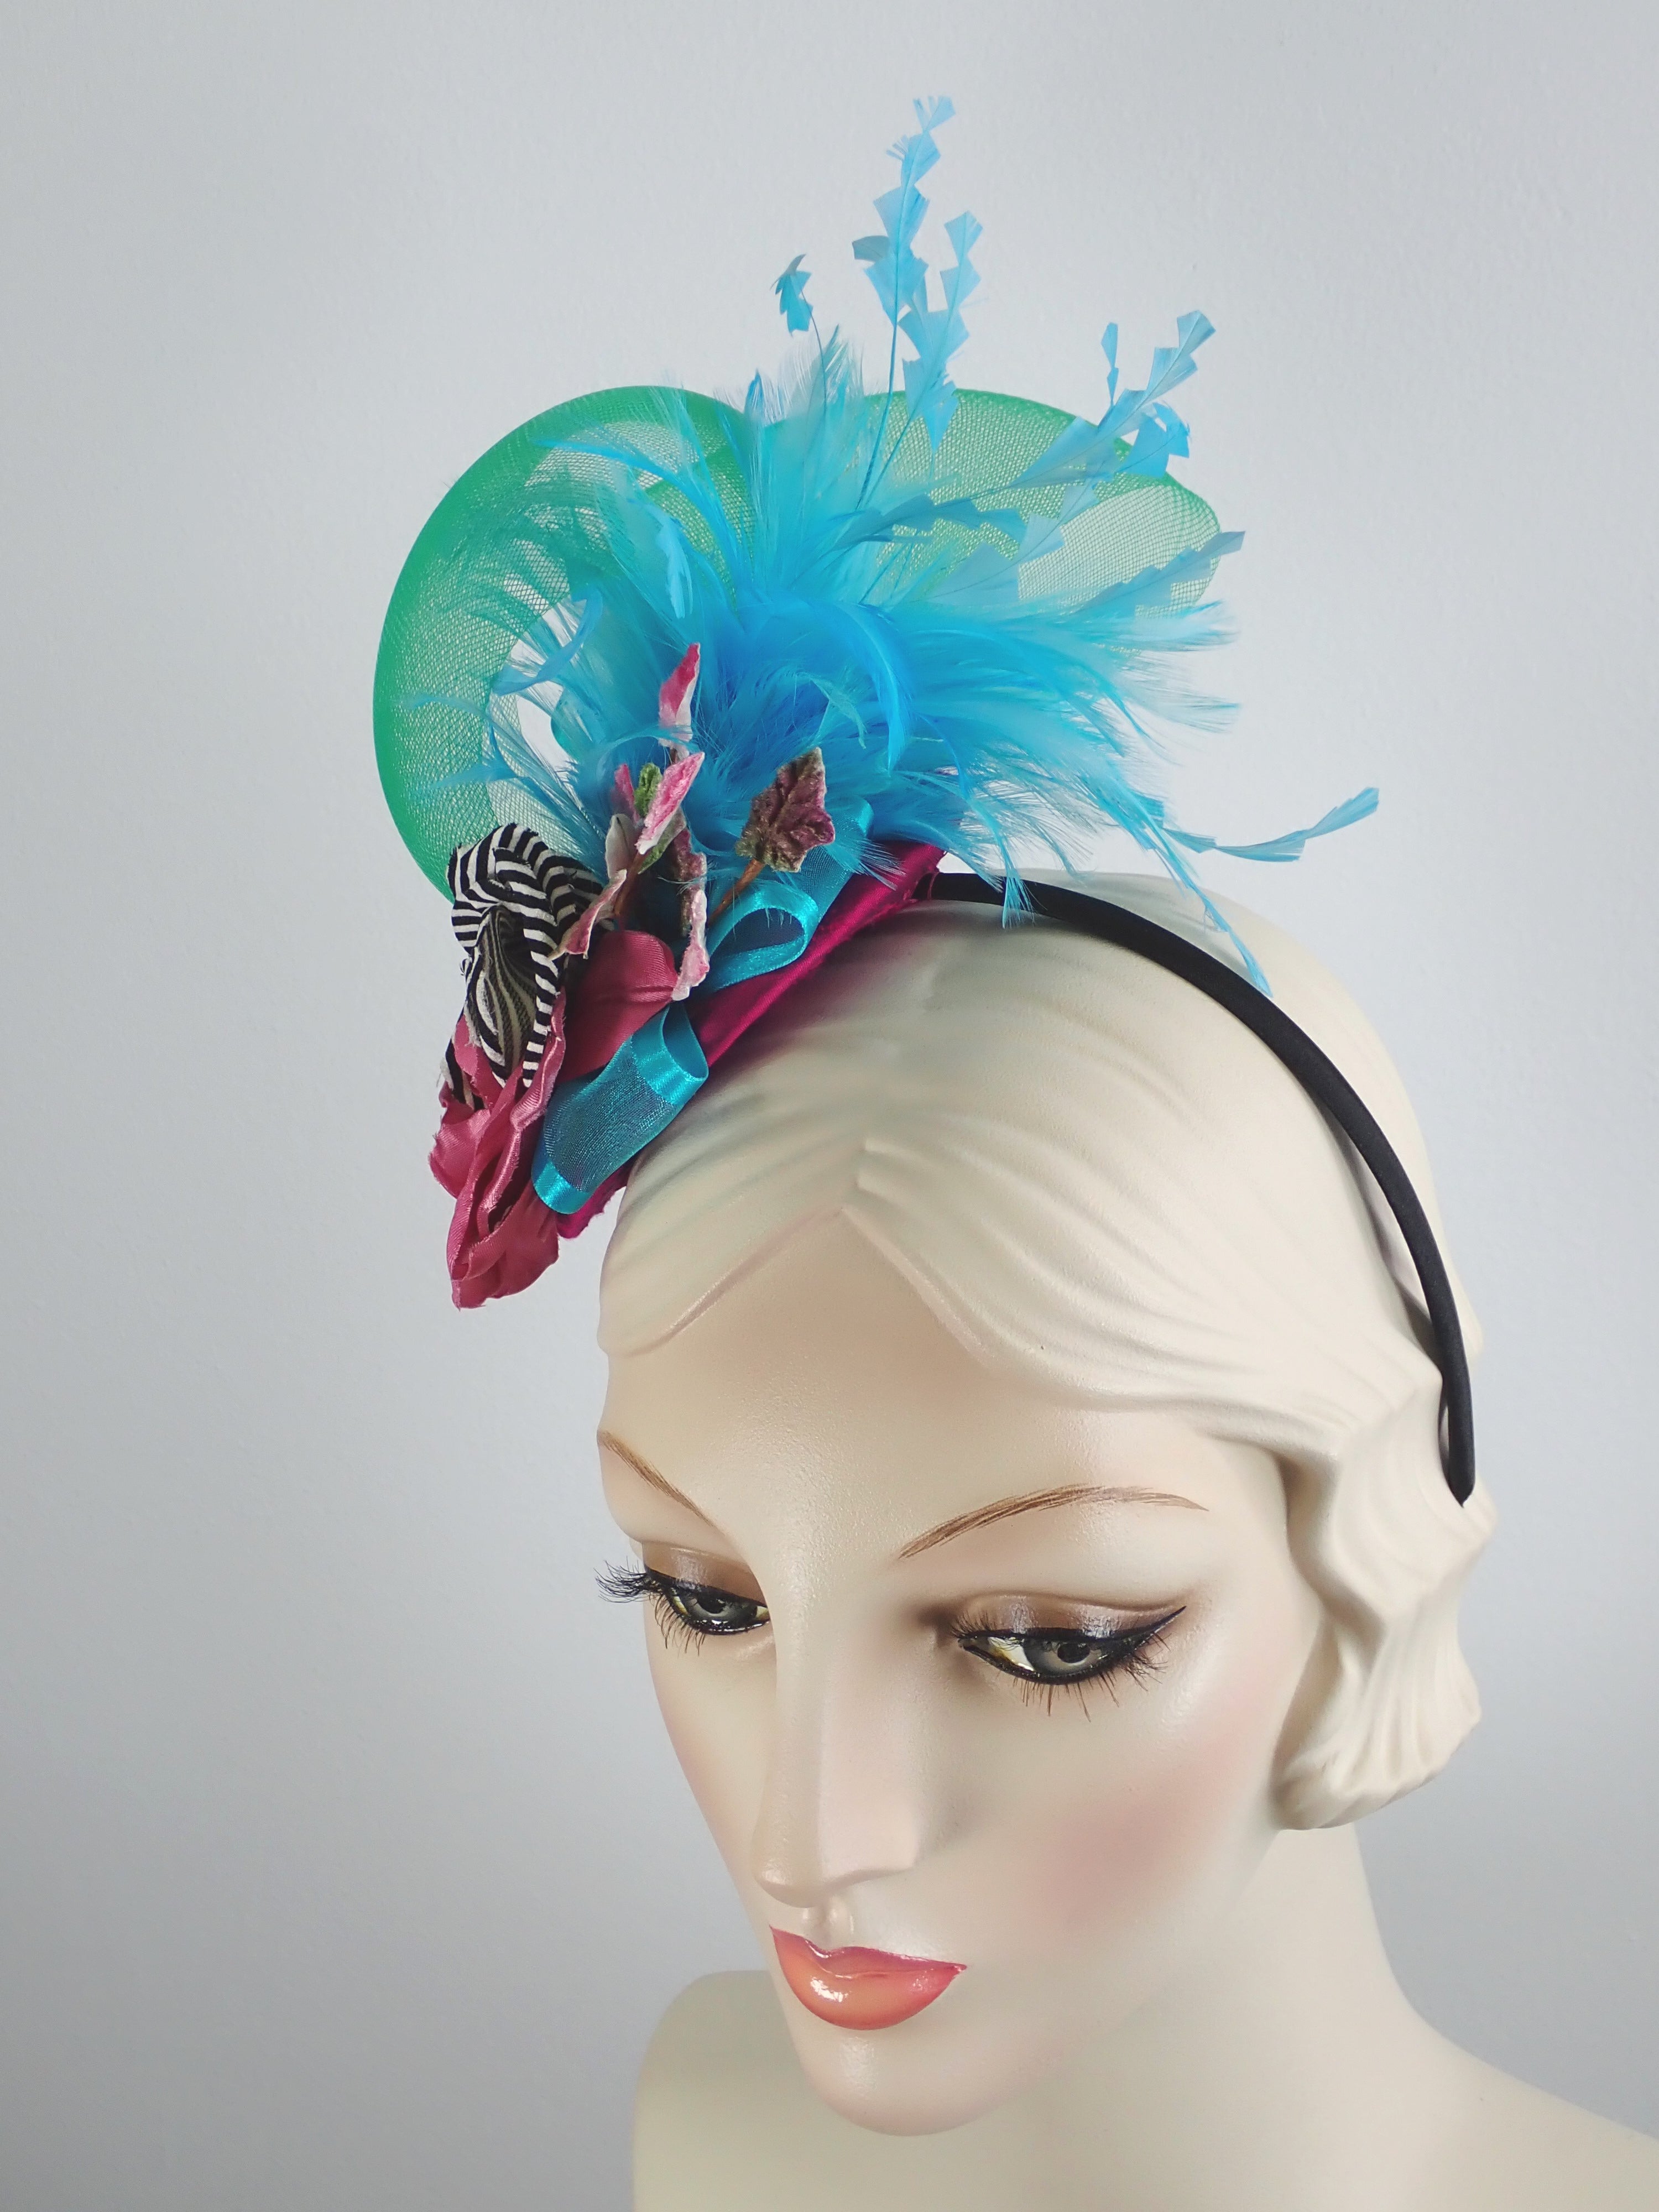 Blue, Green, Pink Womens Fascinator Hat for Church, Wedding, Tea Party